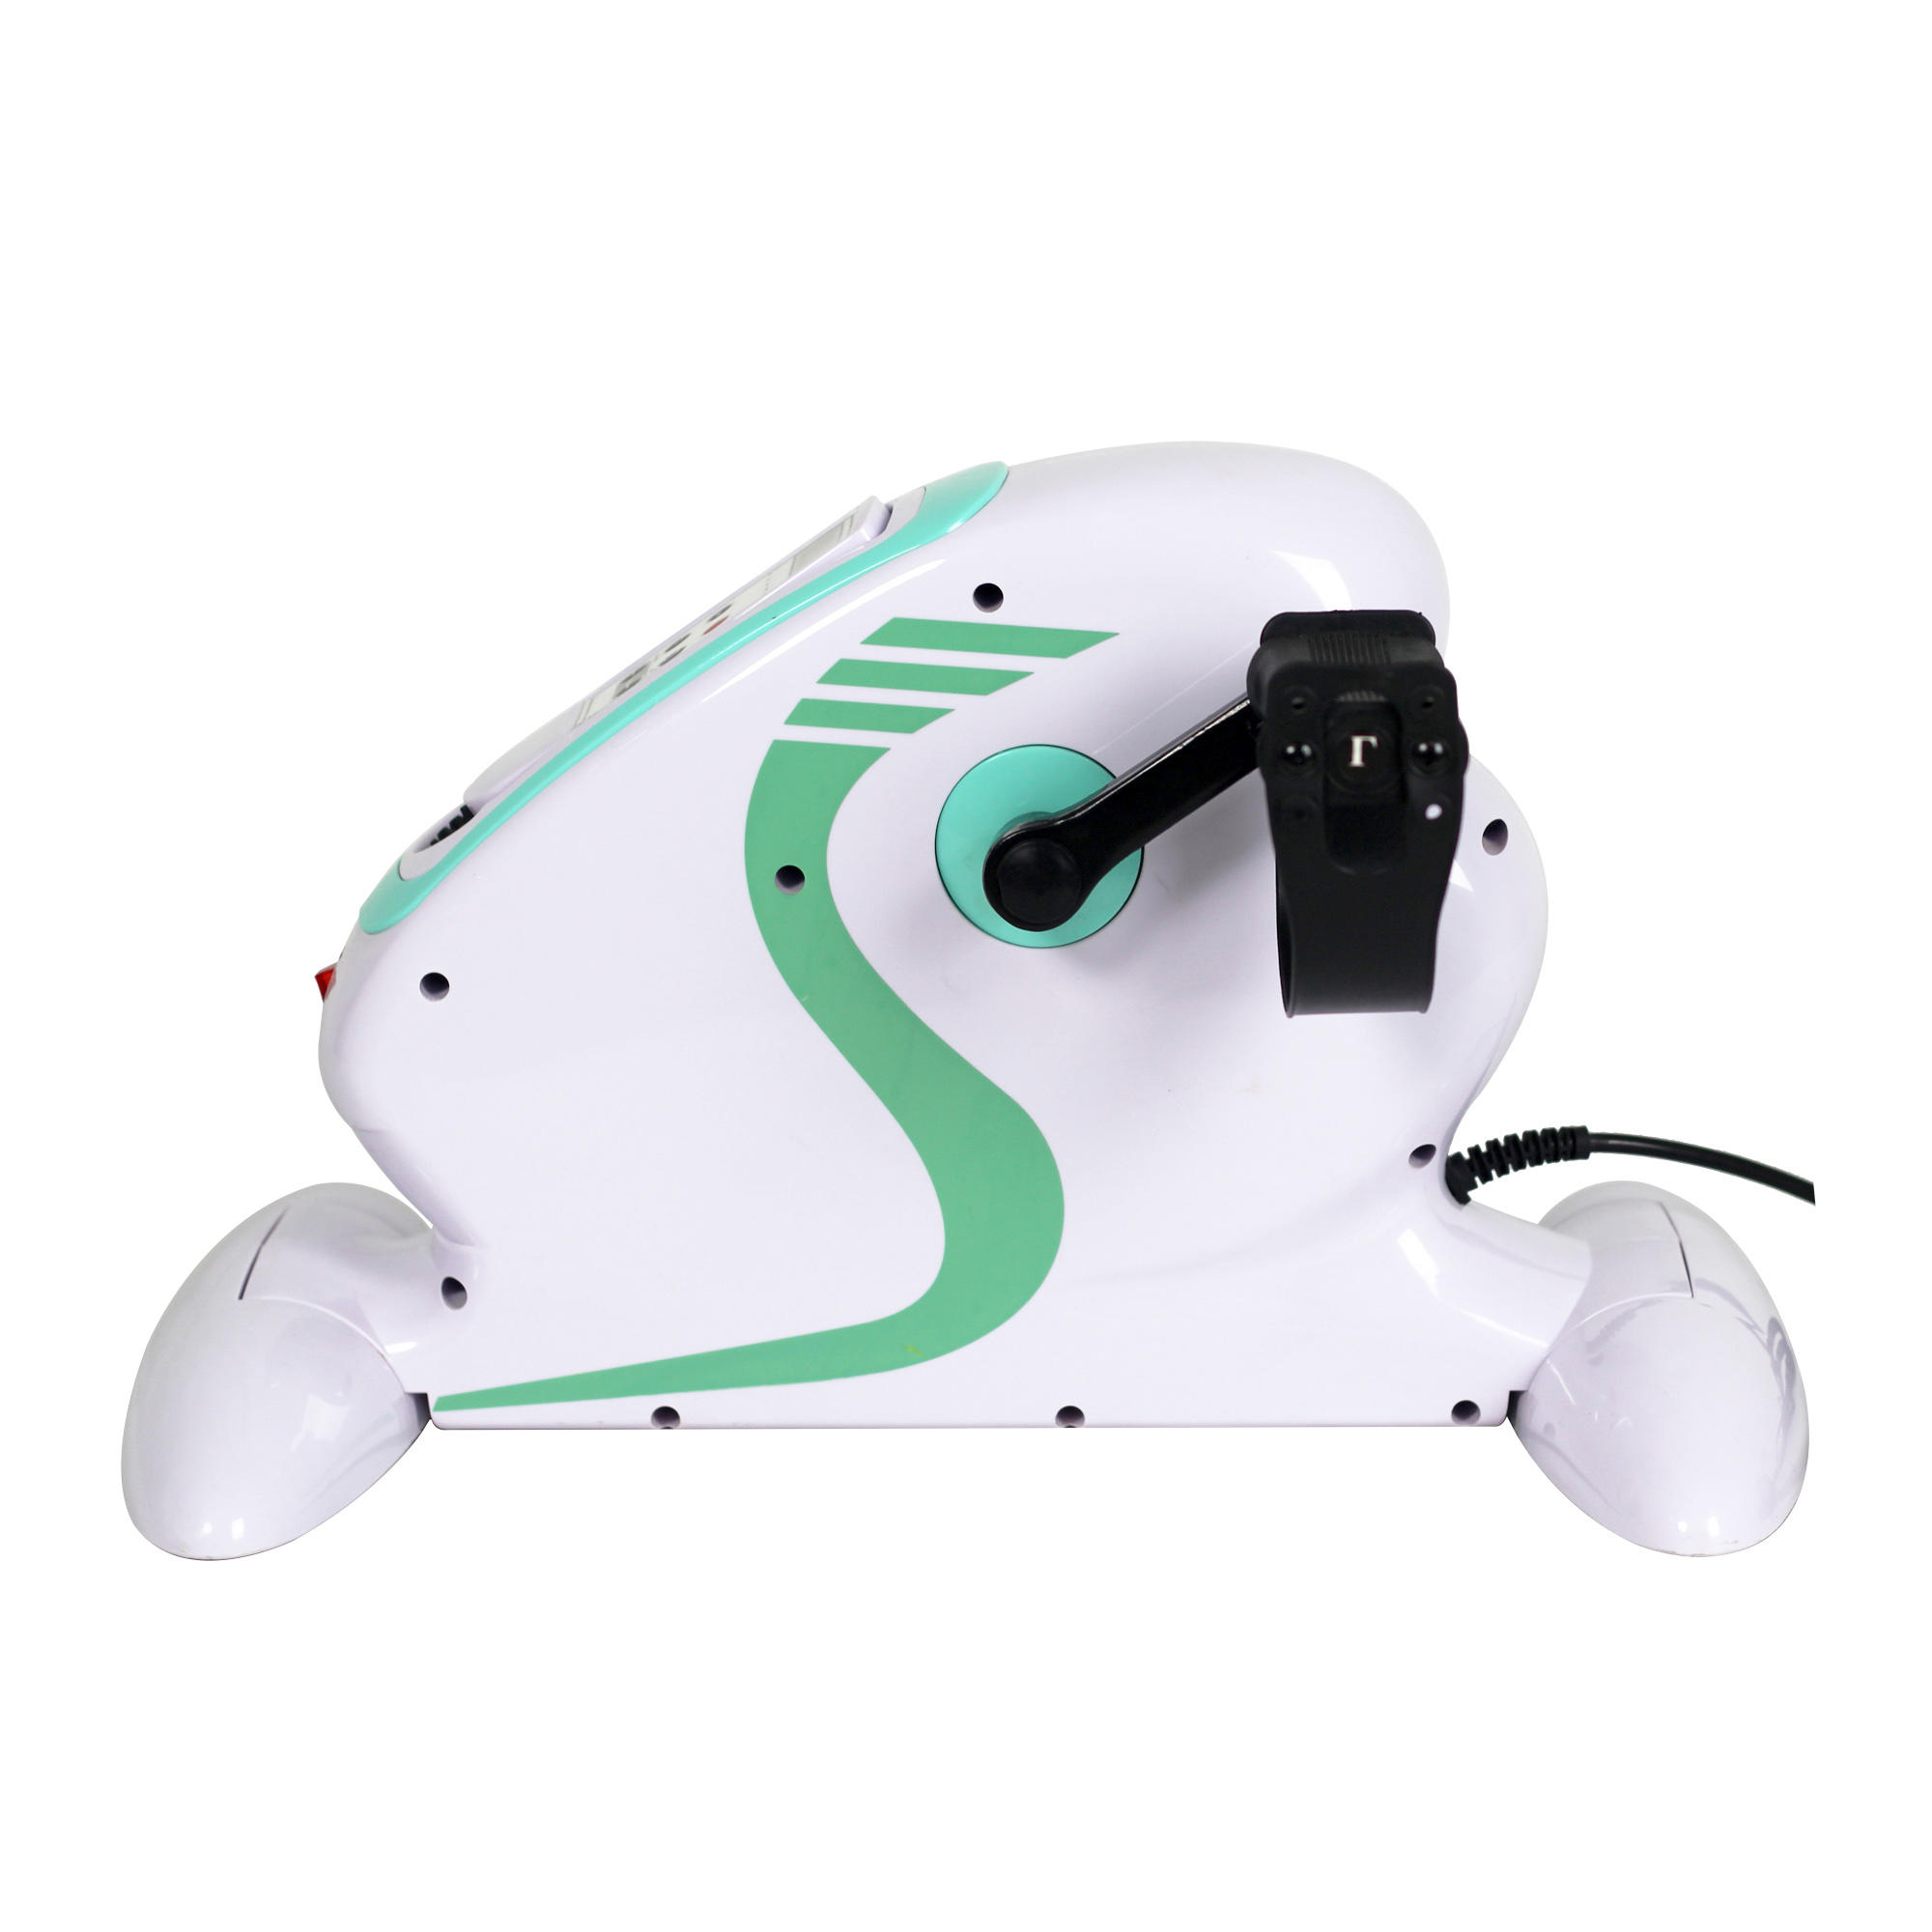 HY-F6008 indoor Electric mini Pedal Exerciser bike